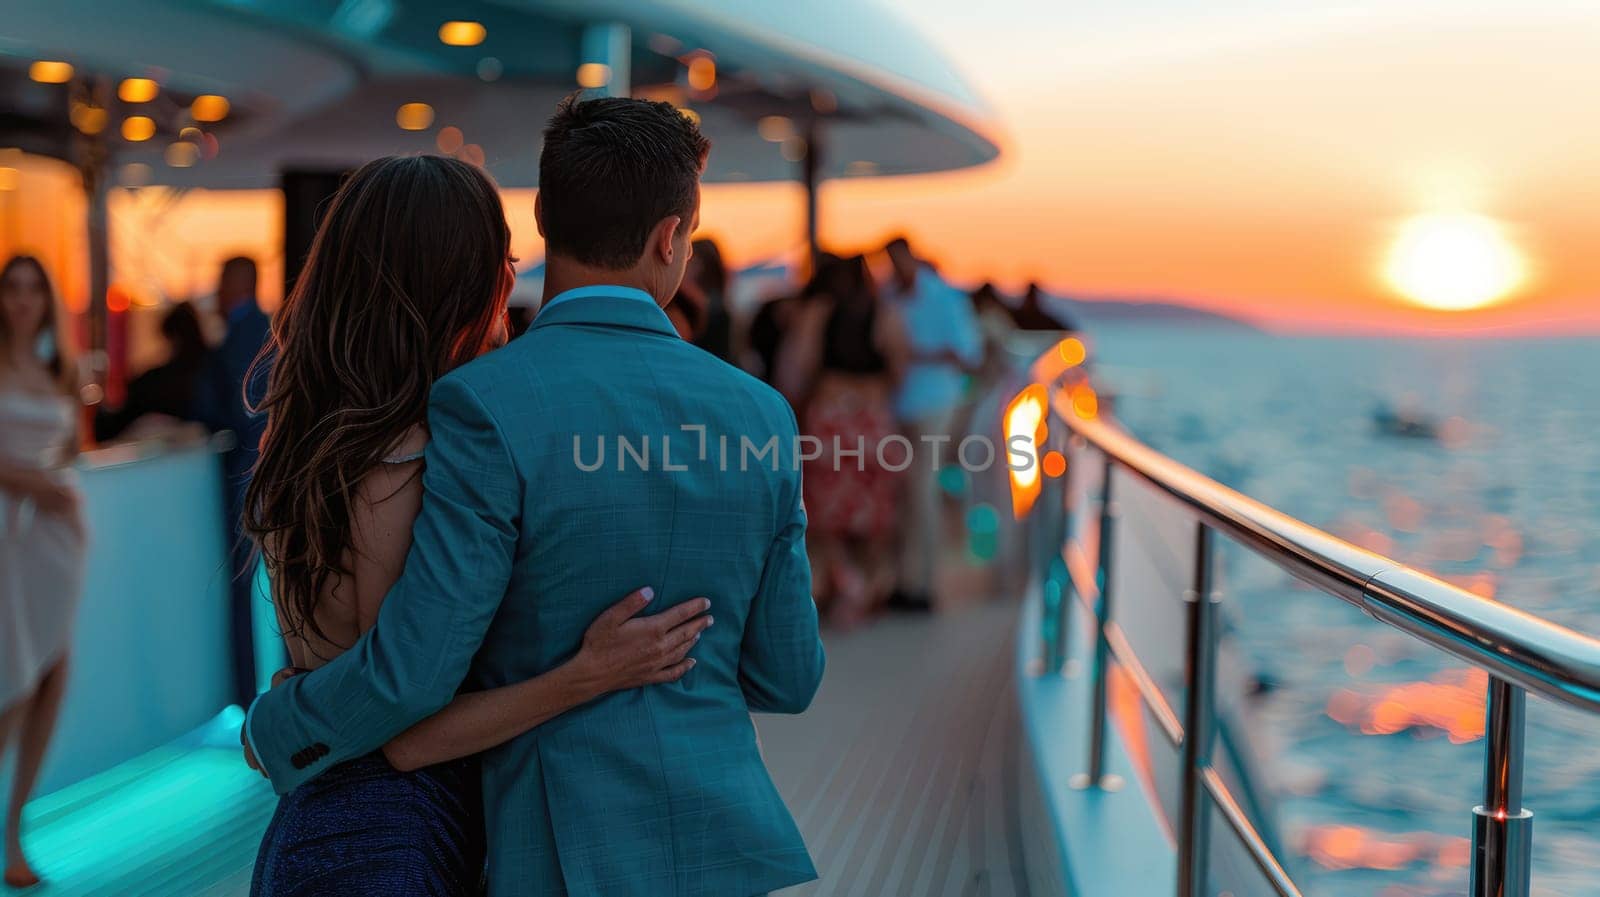 Party on a yacht. Boat yacht sailing in the sea at sunset on summer vacation by natali_brill